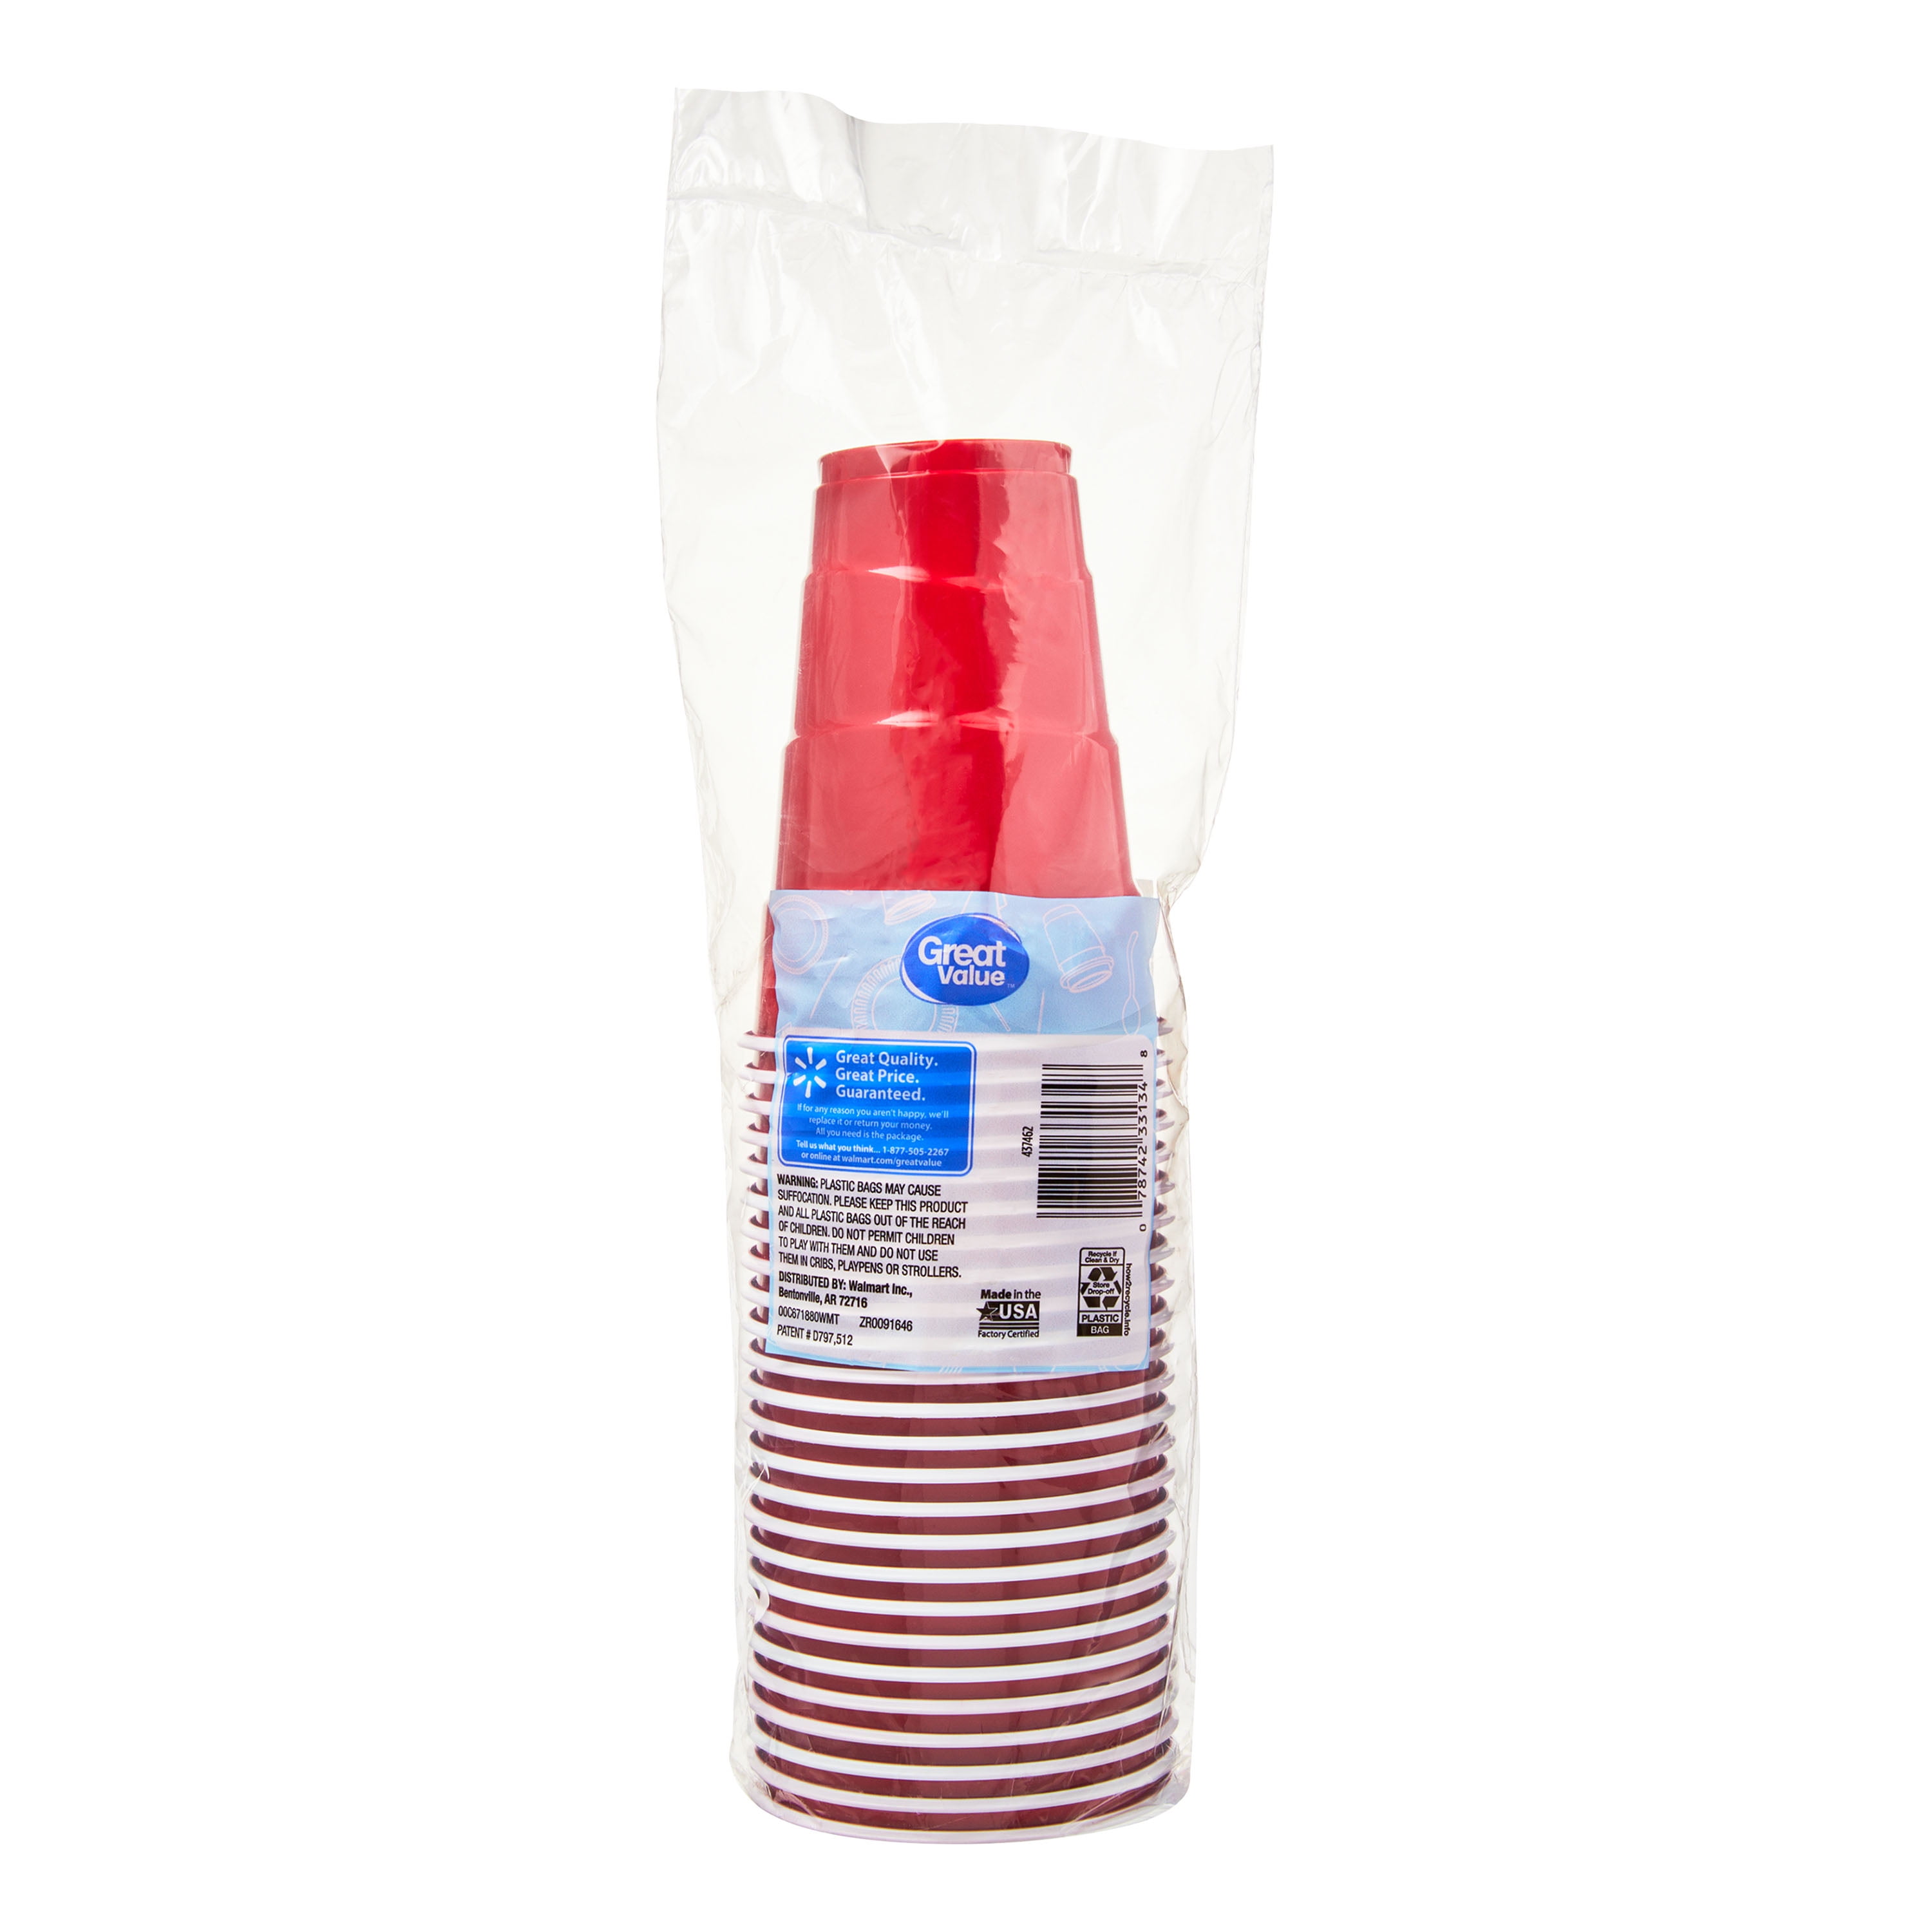 Great Value, Hefty® Easy Grip Disposable Plastic Party Cups, 18 Oz